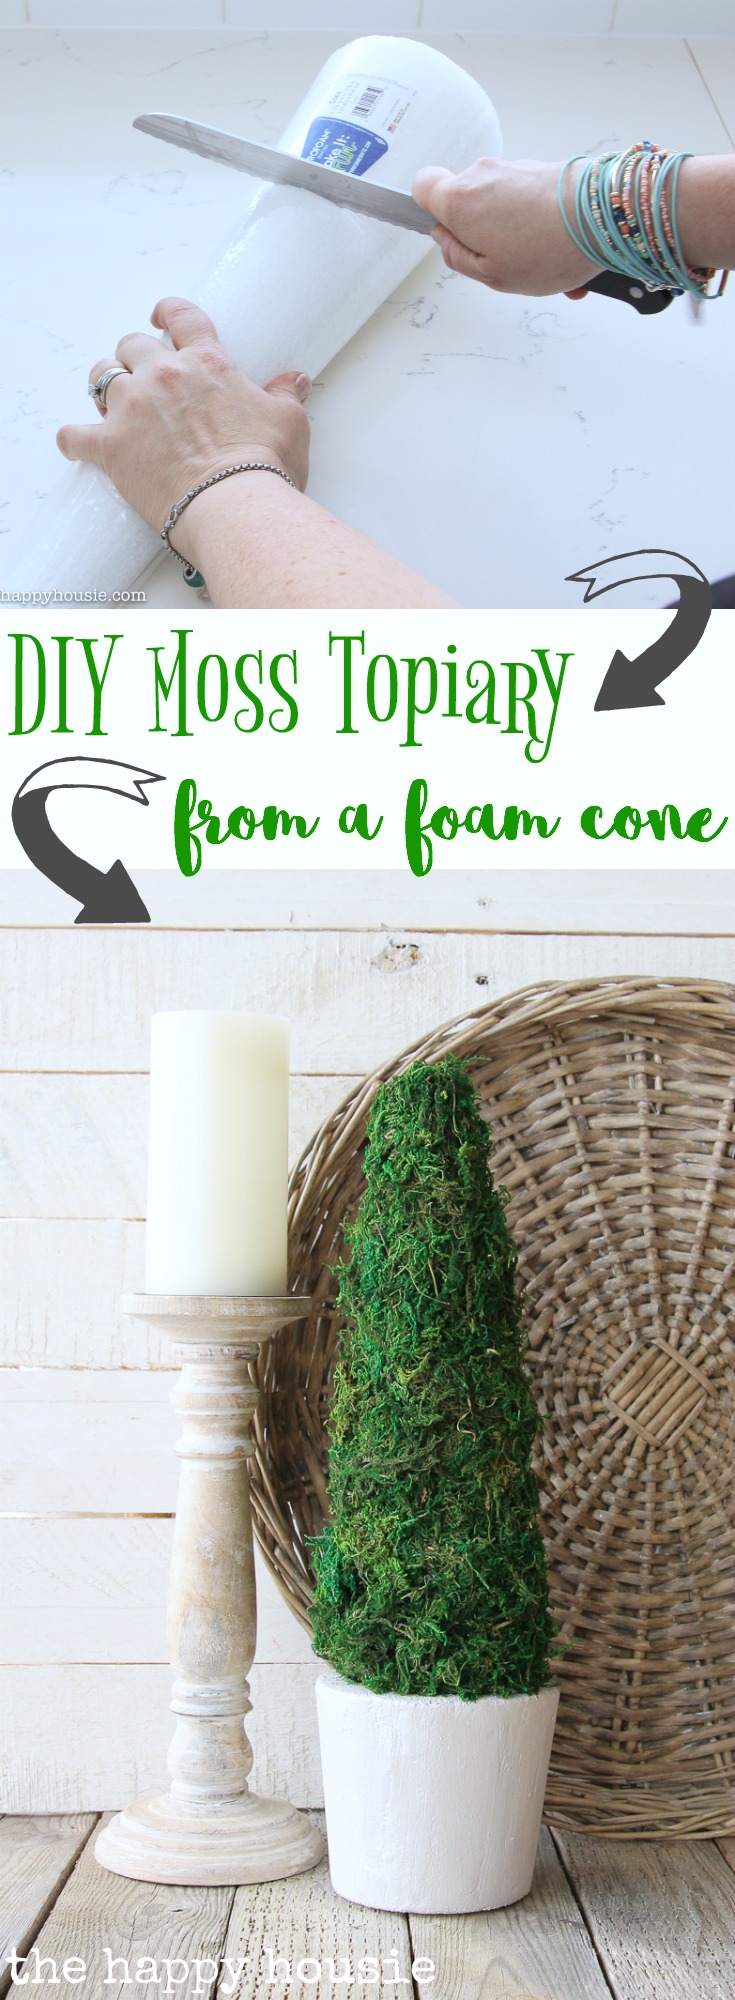 DIY Moss Topiary From A Foam Cone graphic.